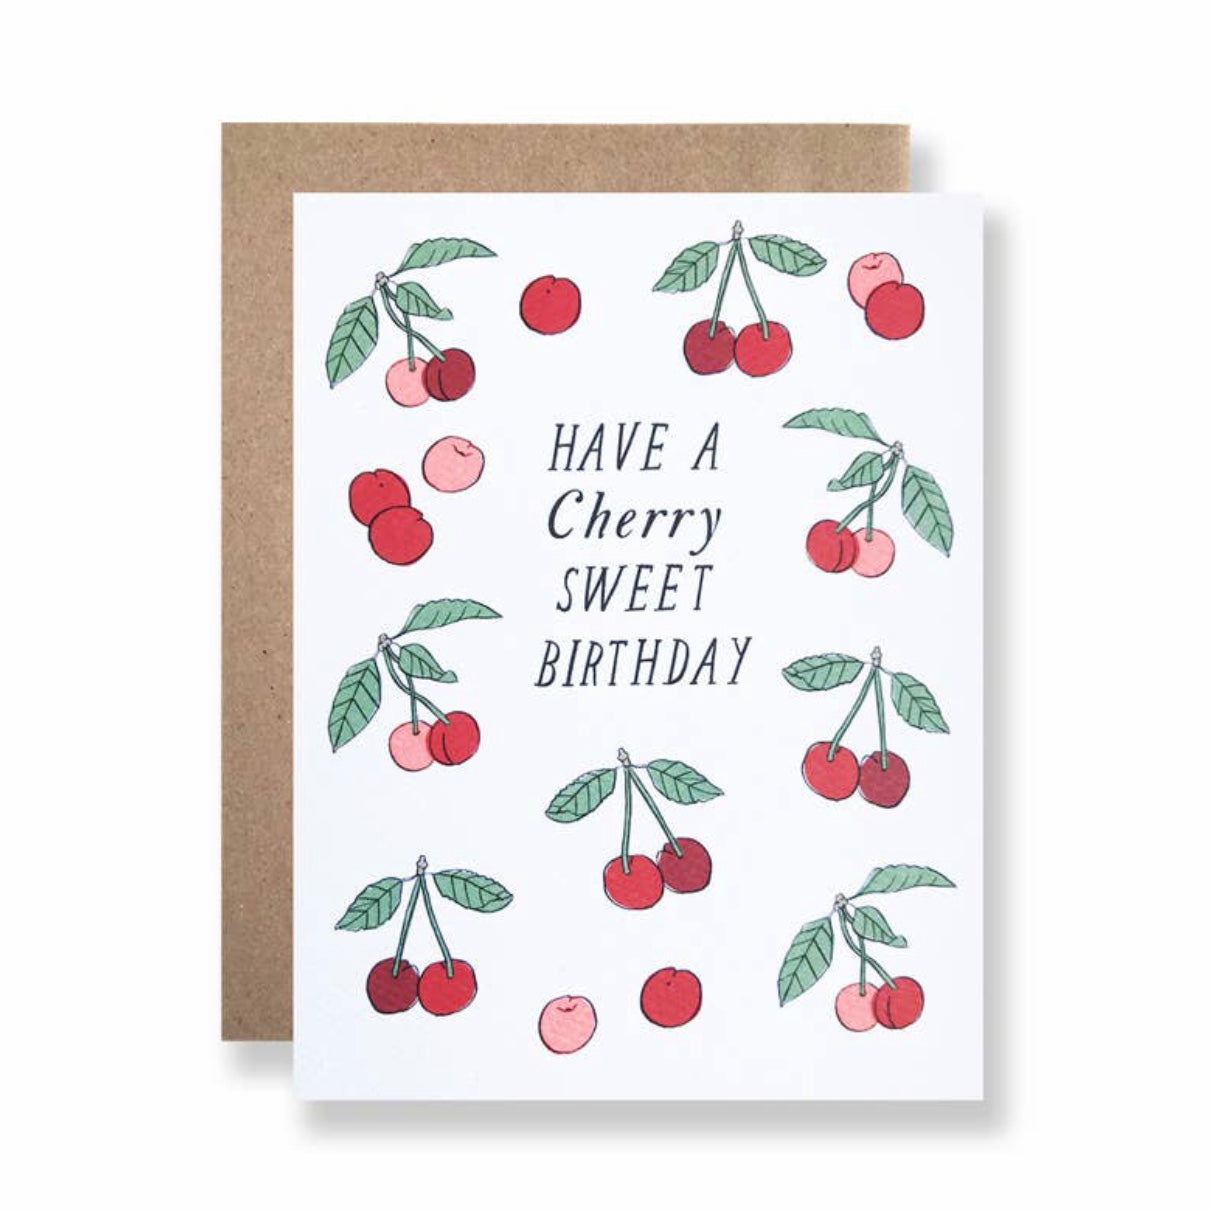 Have a cherry sweet birthday greeting card